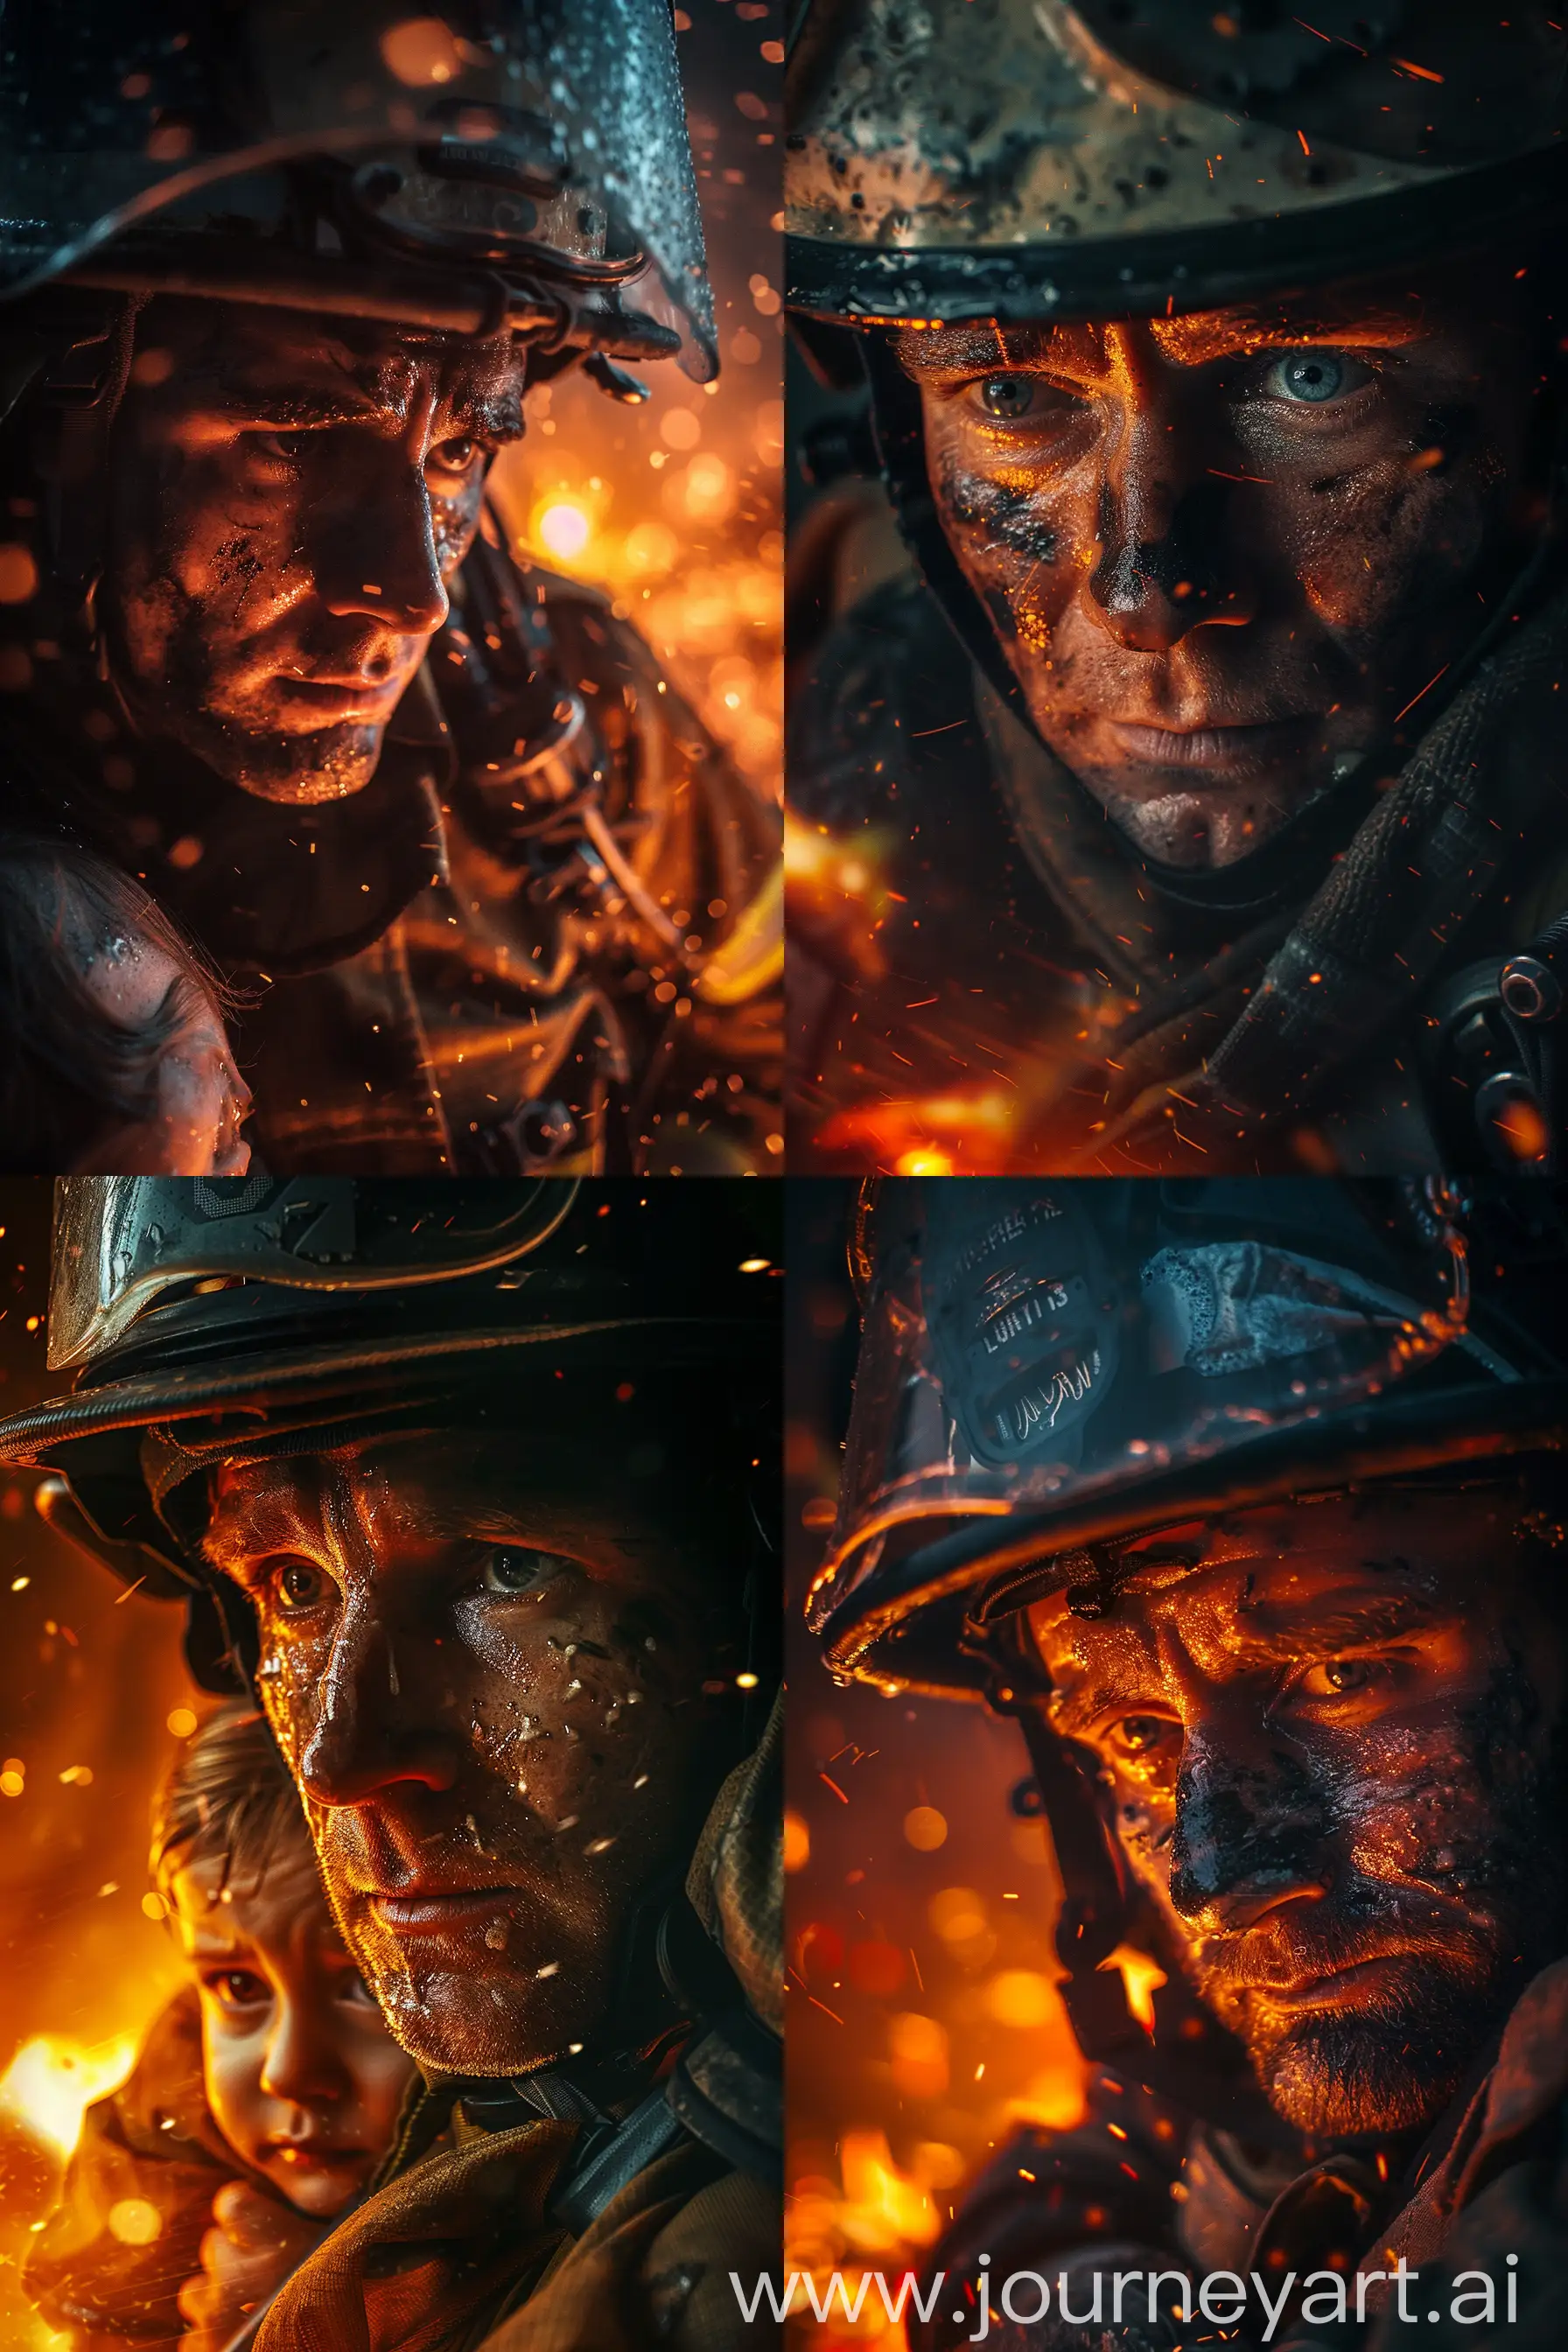 Dramatic close-up portrait of a firefighter's face, capturing the emotion, exhaustion, and heroism in his eyes. The firefighter is in full protective gear (helmet, mask, suit), with soot and sweat on his face. He is carrying a child to safety from a burning building at night. The portrait is tightly framed, with the firefighter's face filling most of the image, properly centered. Intense flames, smoke, and glowing embers are visible in the background, slightly out of focus. Cinematic lighting emphasizes the firefighter's struggle and bravery. Shallow depth of field, 85mm lens, 4k resolution --ar 2:3 --v 6